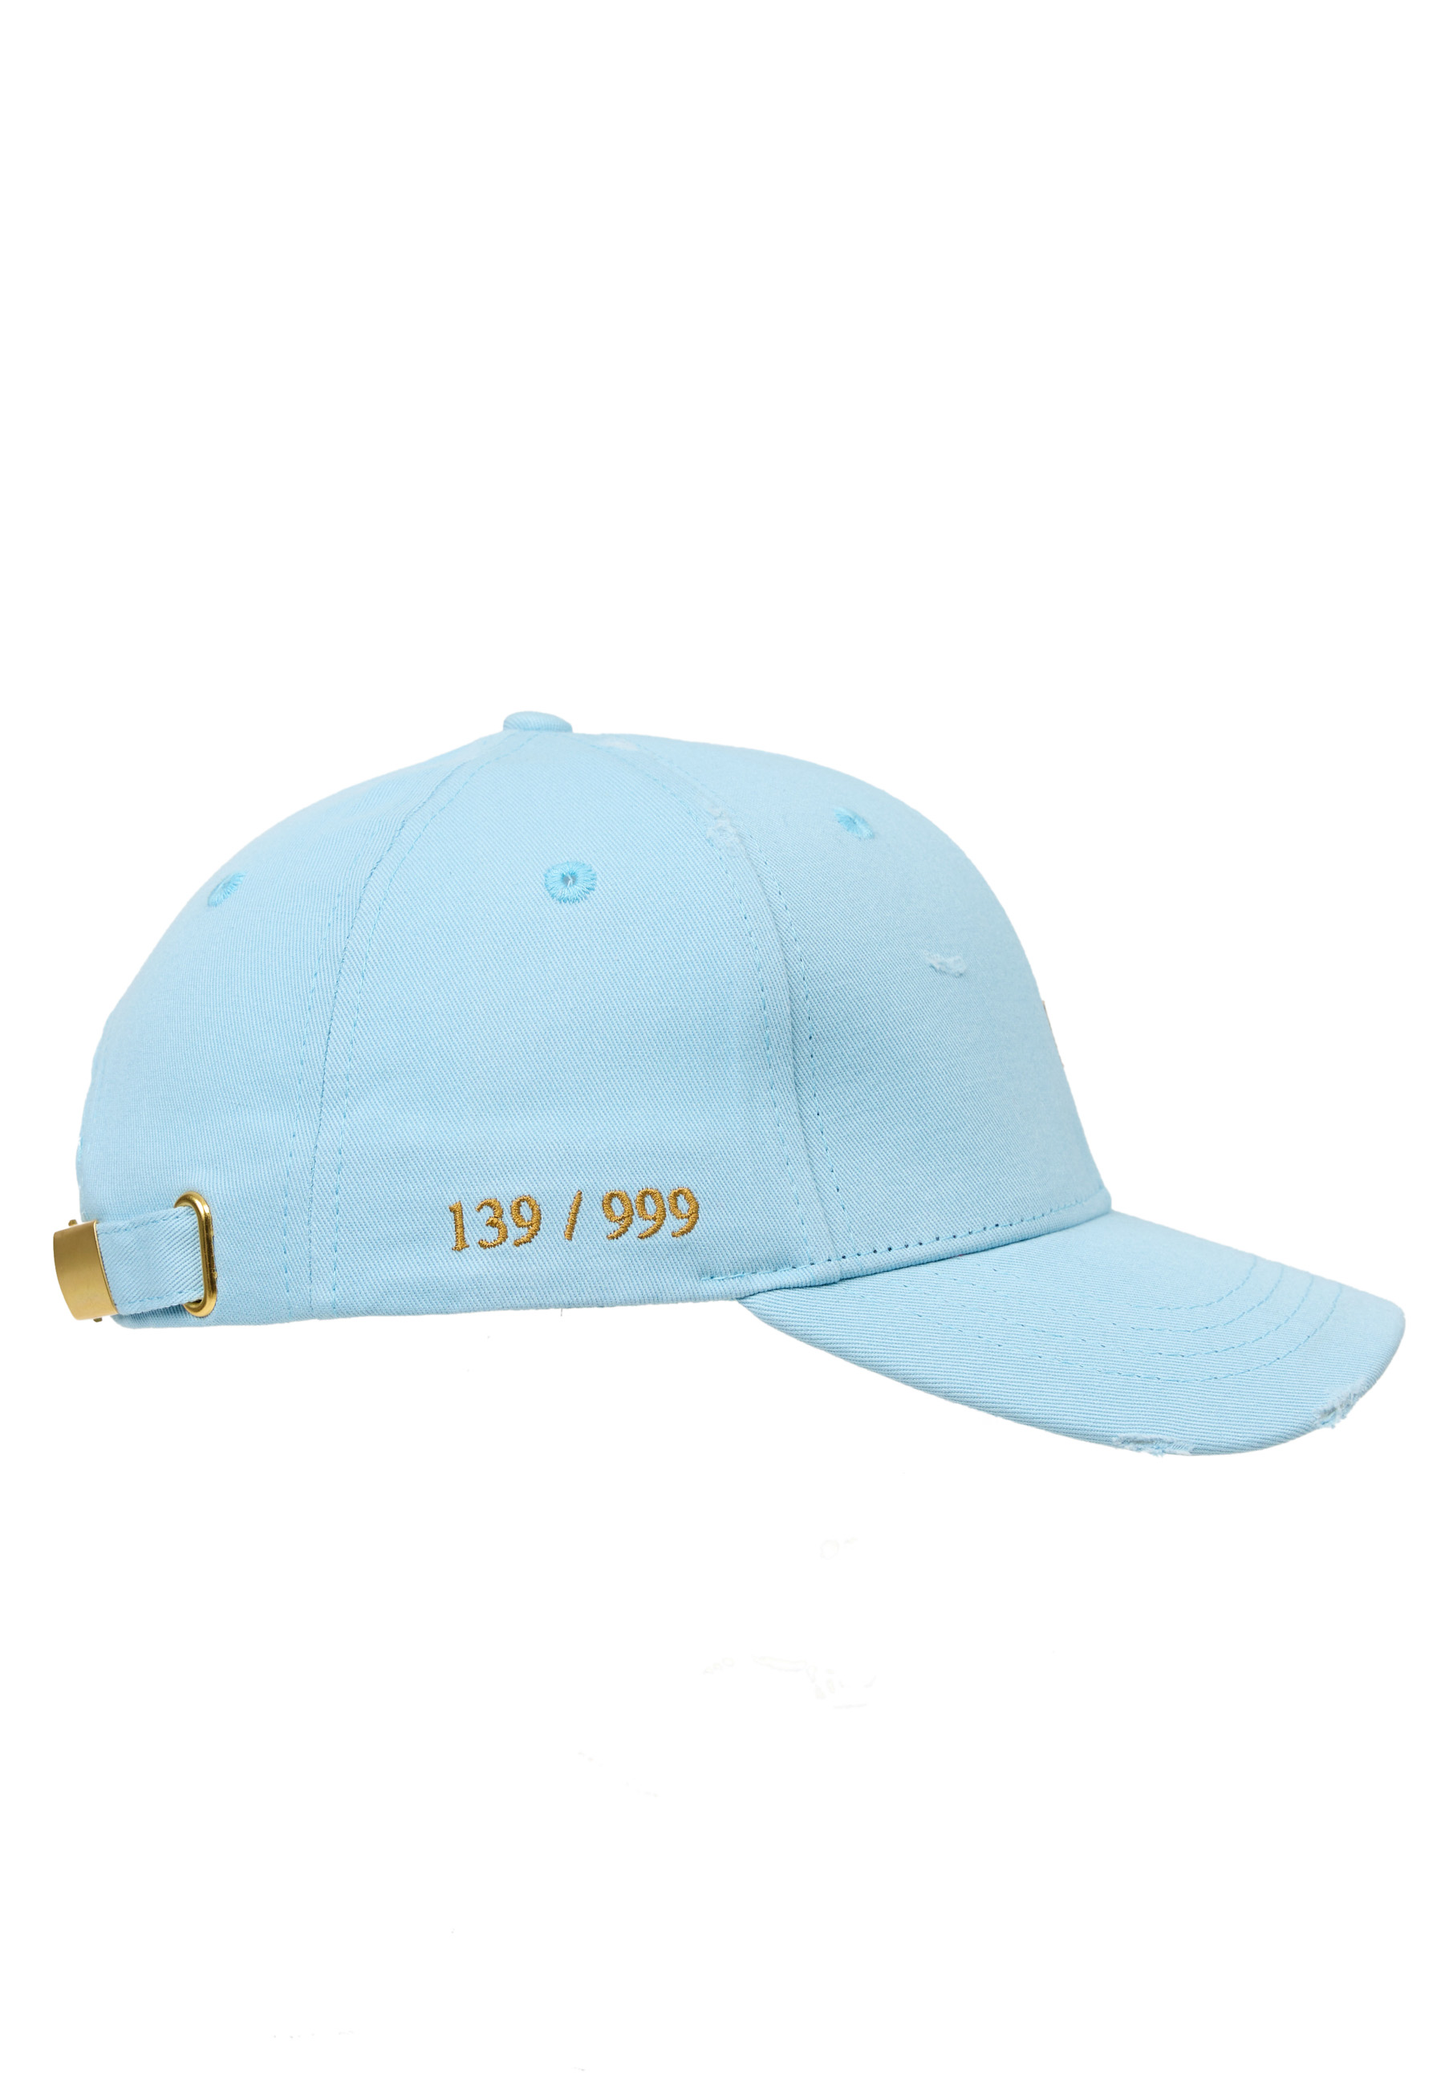 LUXAGER 1st EDITION Cap sky blue